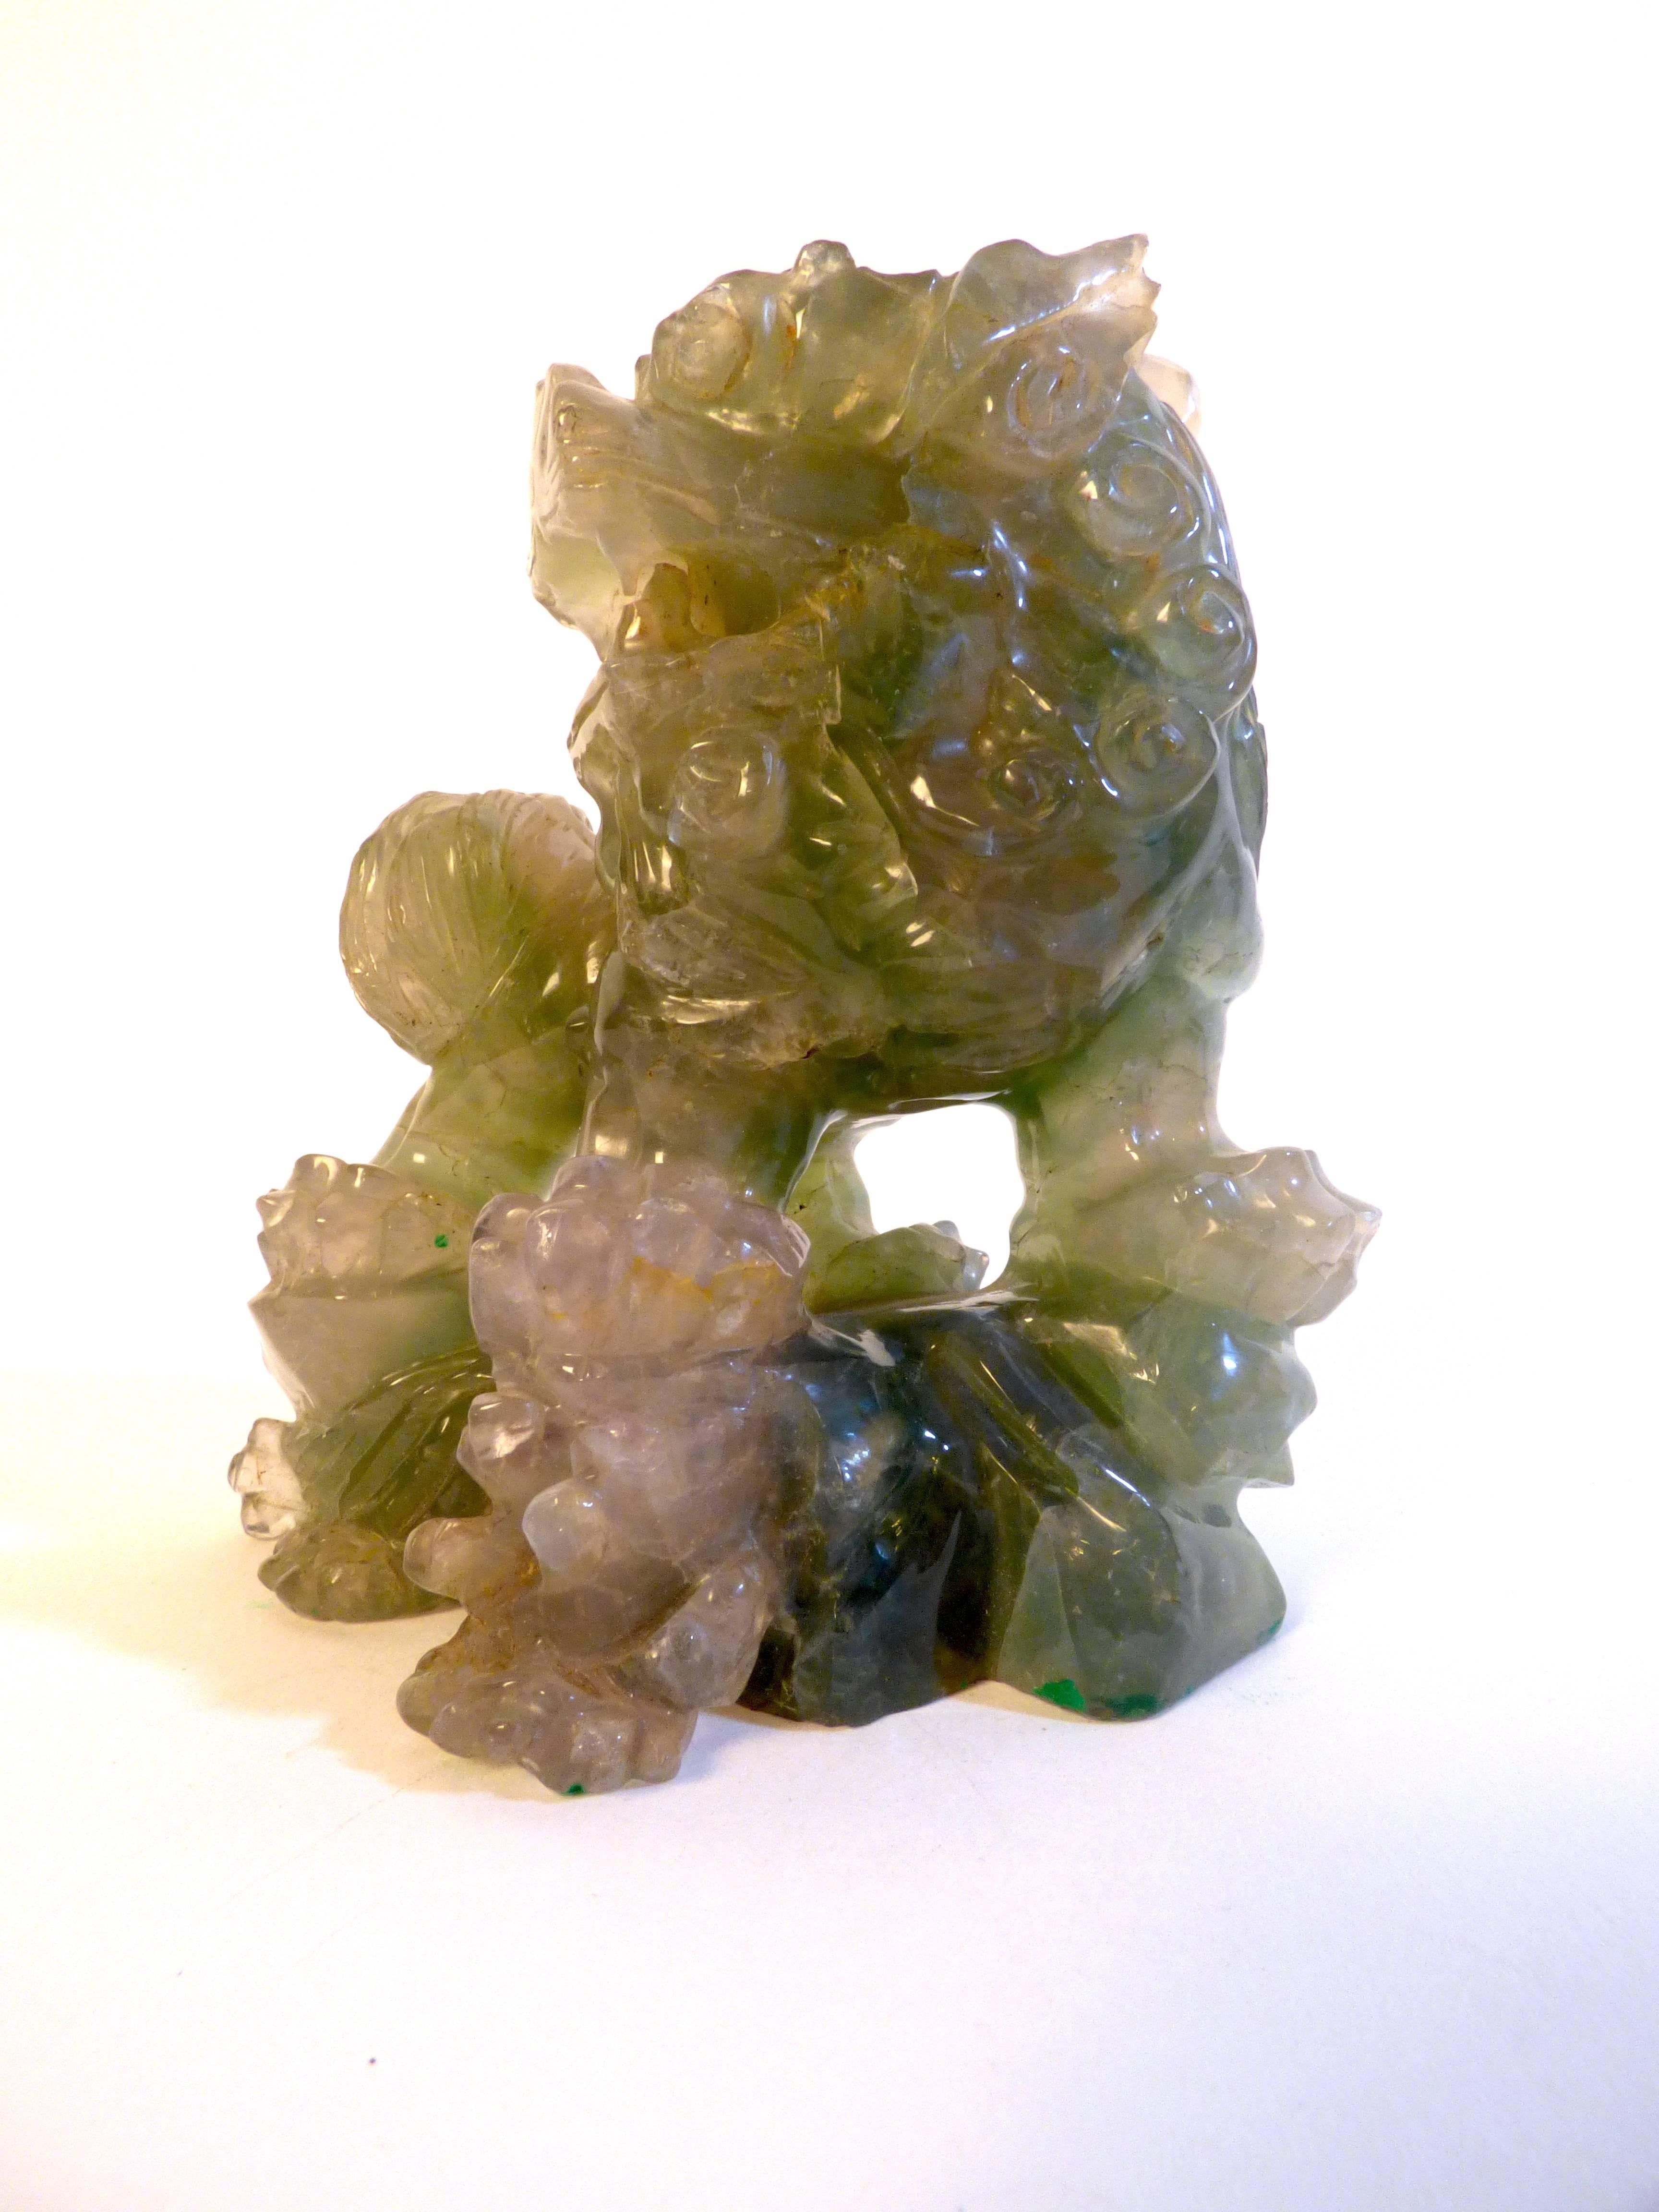 A beautiful sculpture in stone of Fluorite produced in China. Fluorite is a mineral composed of calcium fluoride. Fluorite stimulates creativity and imagination
Italian private collection.